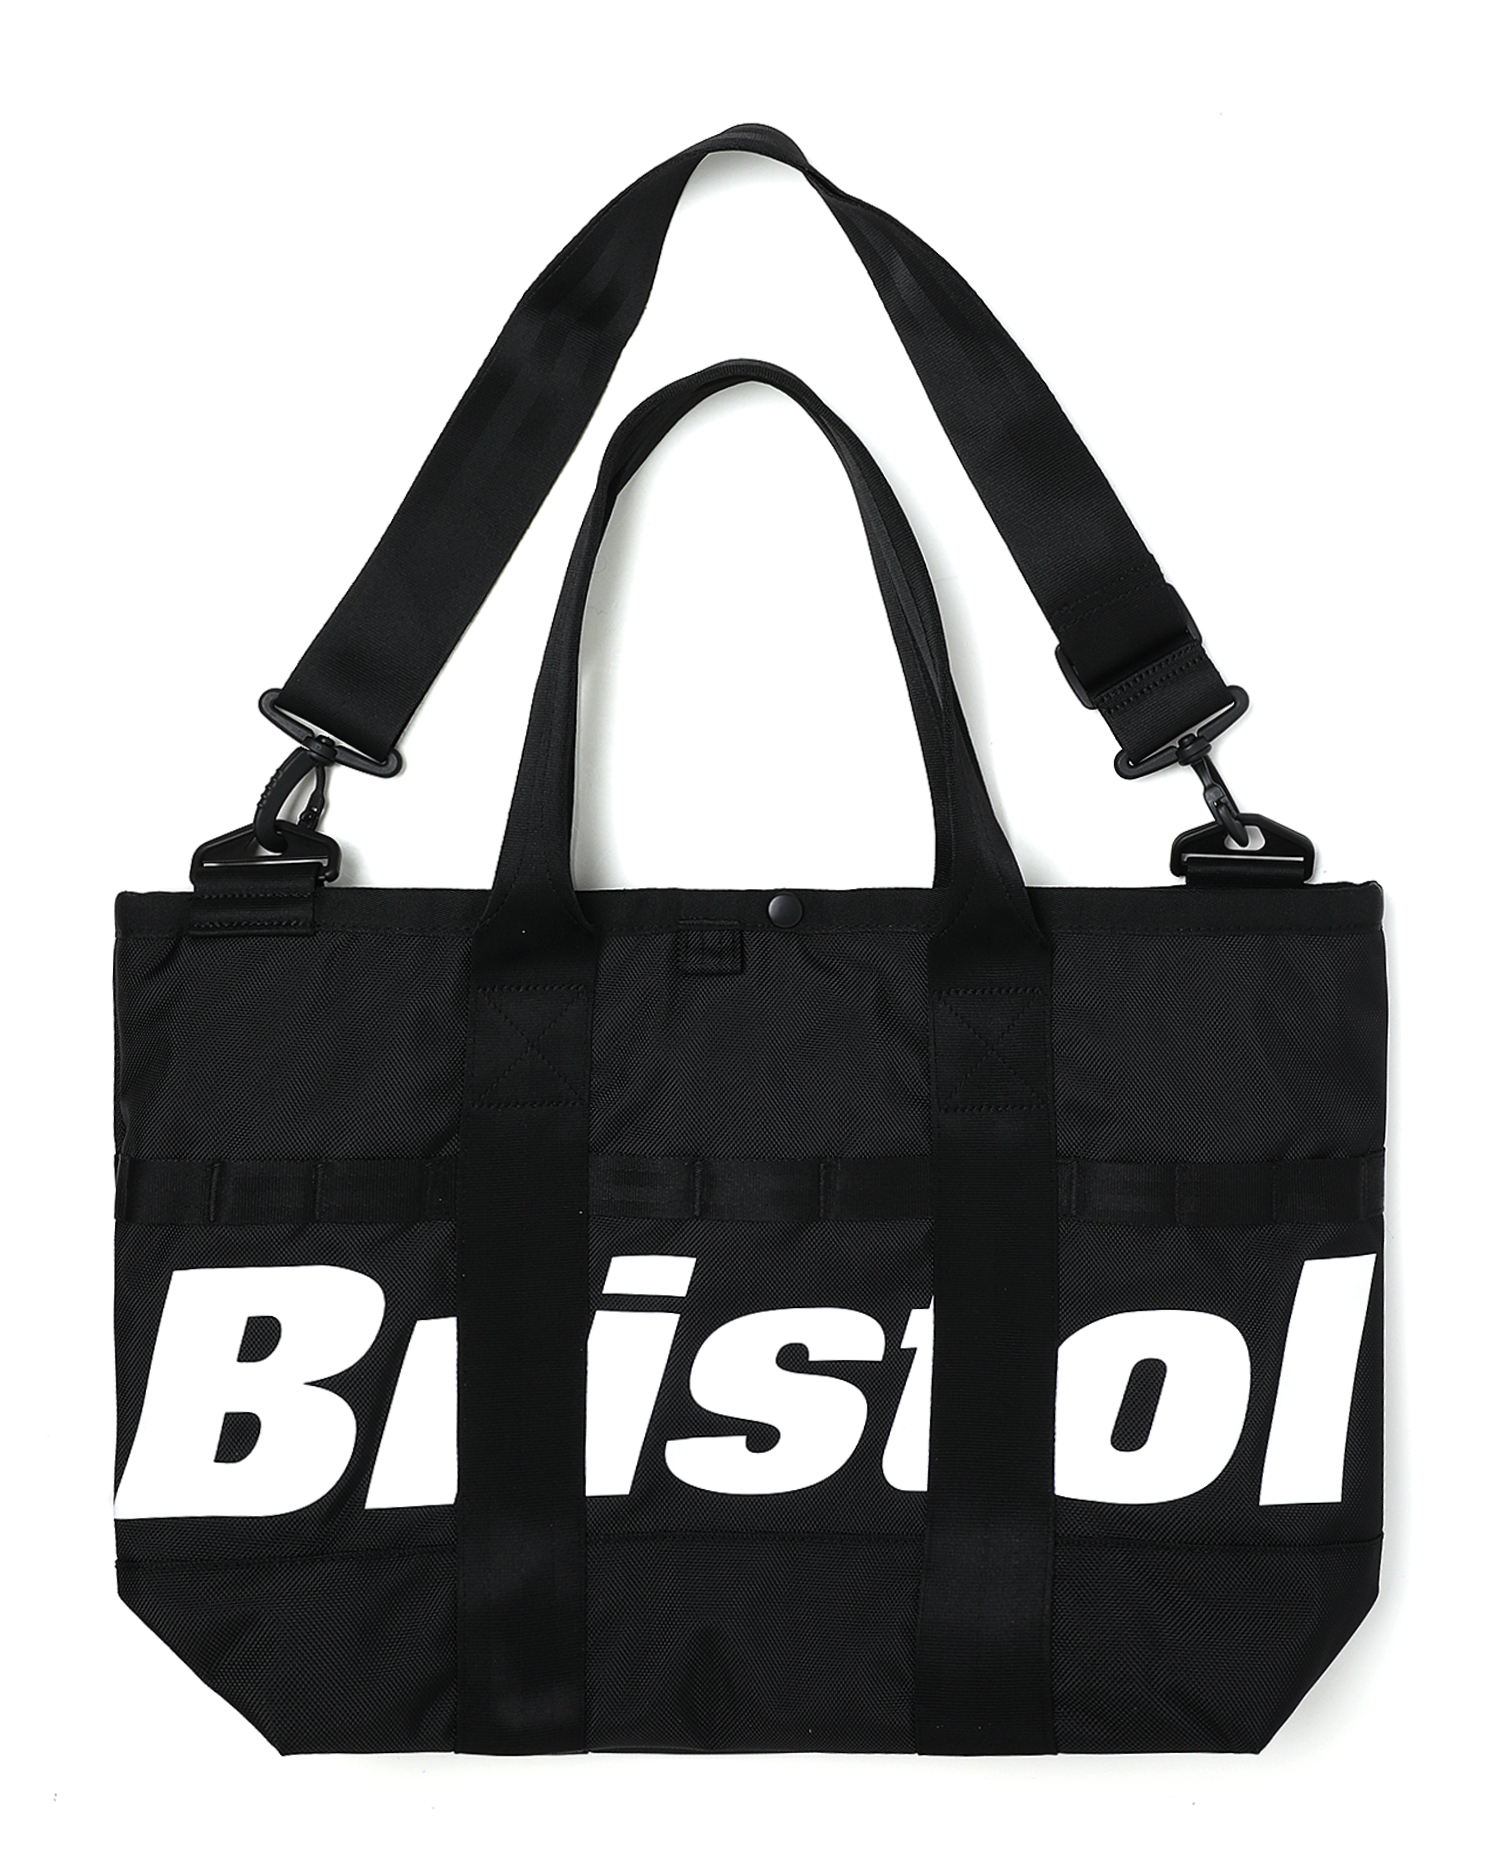 FCRB  SMALL TOTE BAG